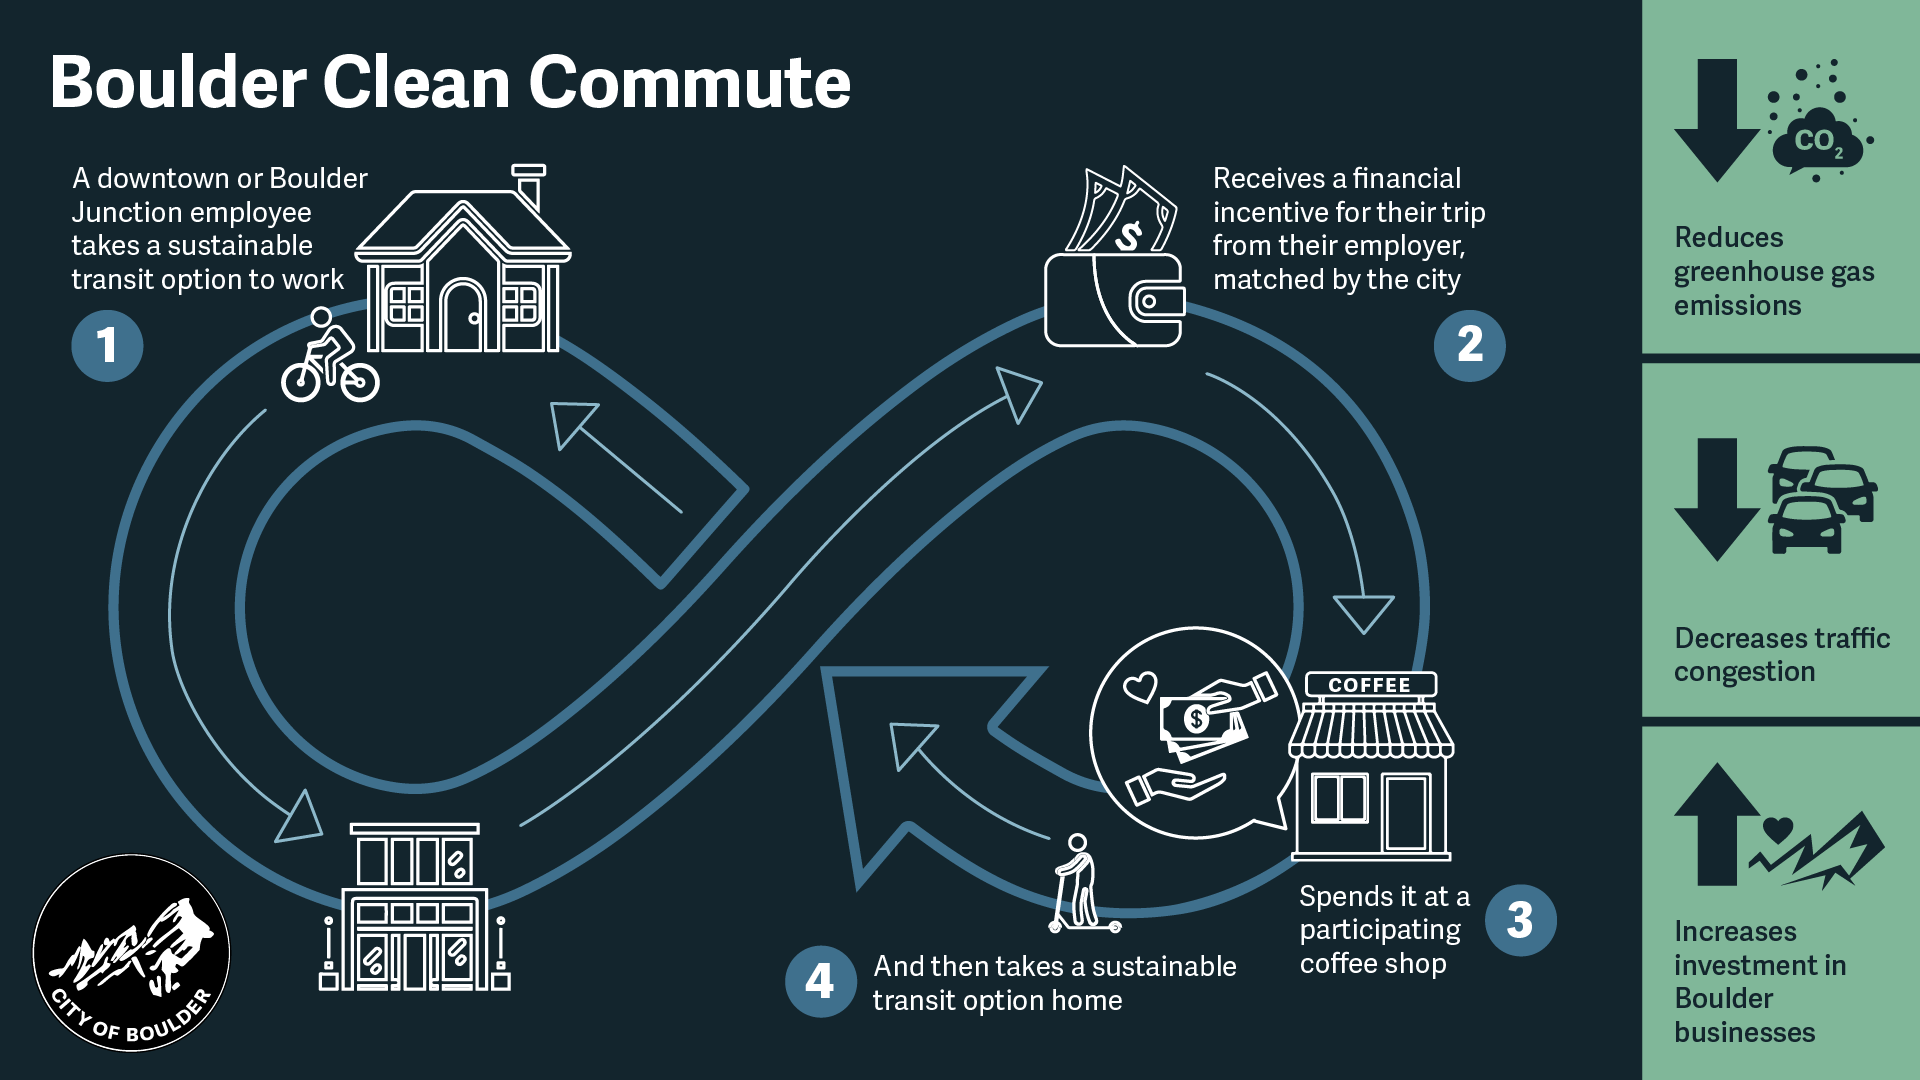 Infographic depicting sustainable commuting behavior and financial rewards